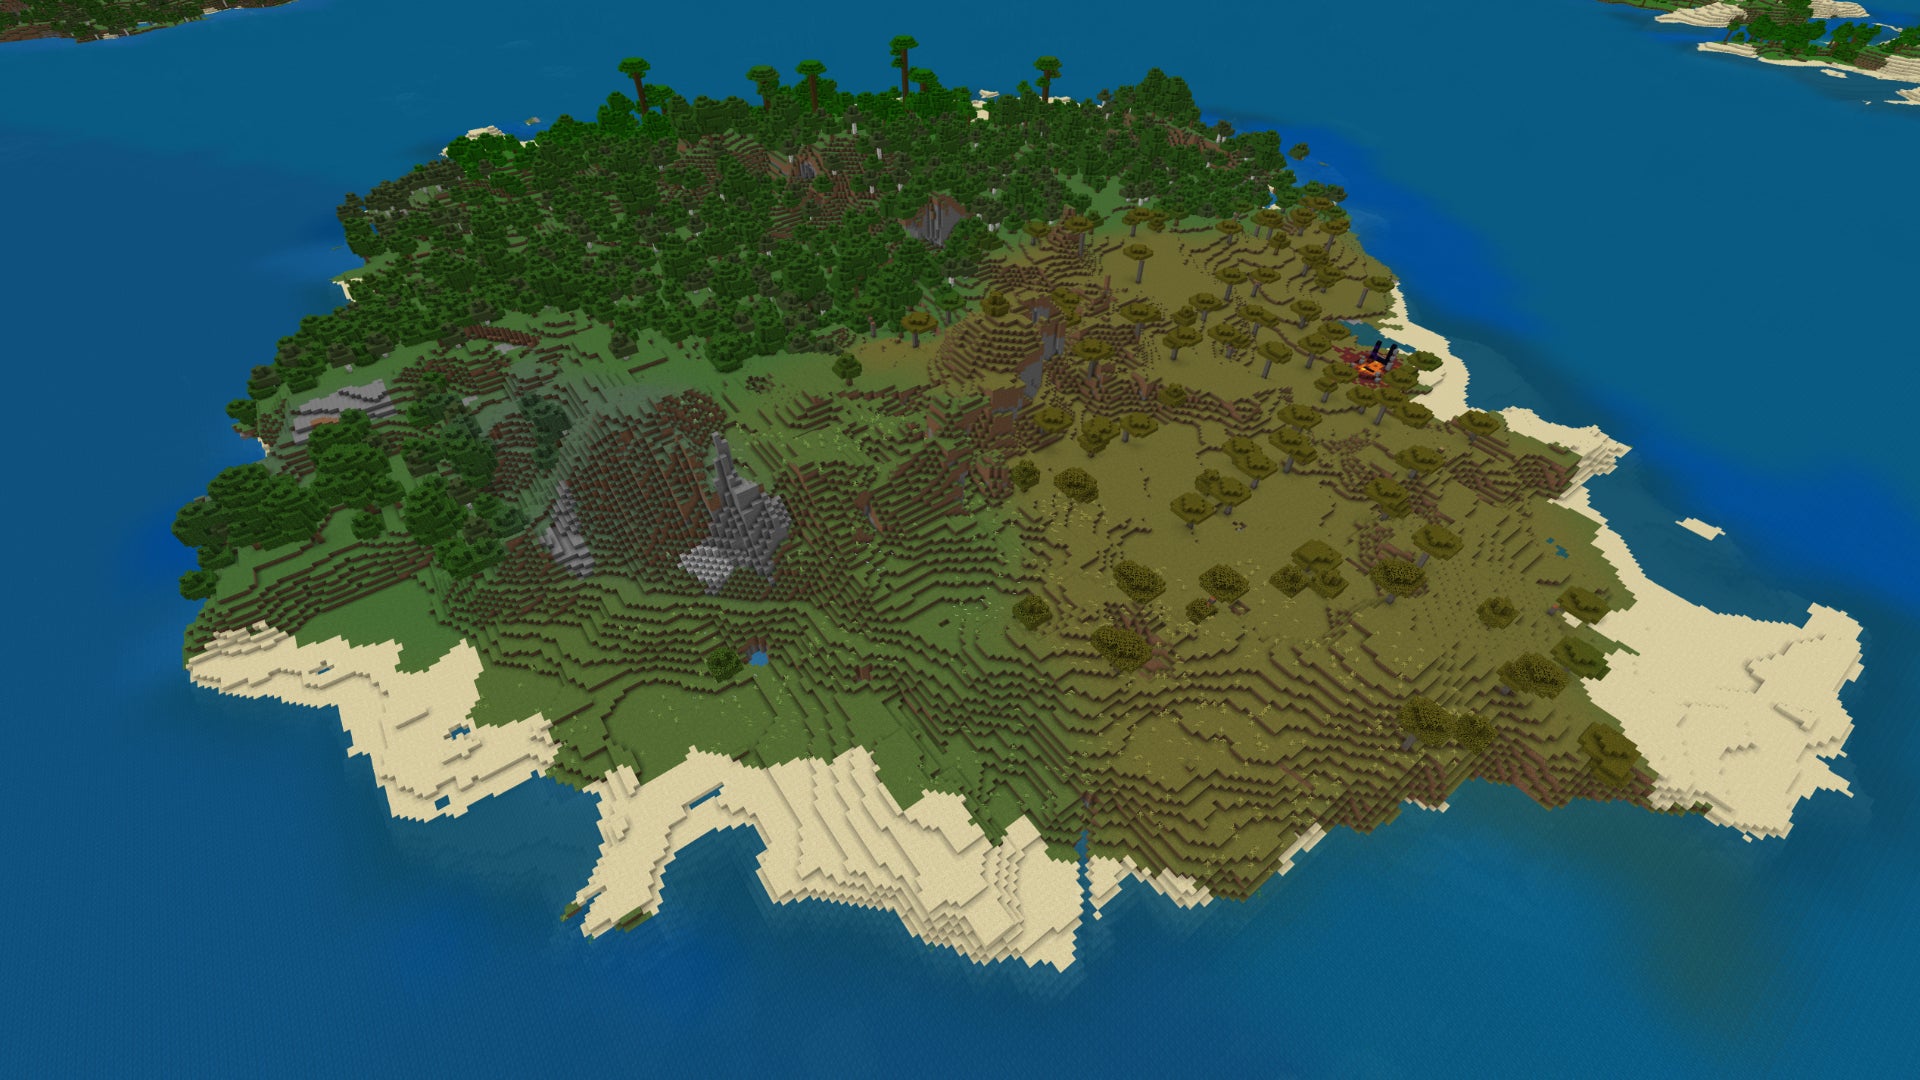 A large island surrounded by the ocean in a Minecraft Bedrock world.